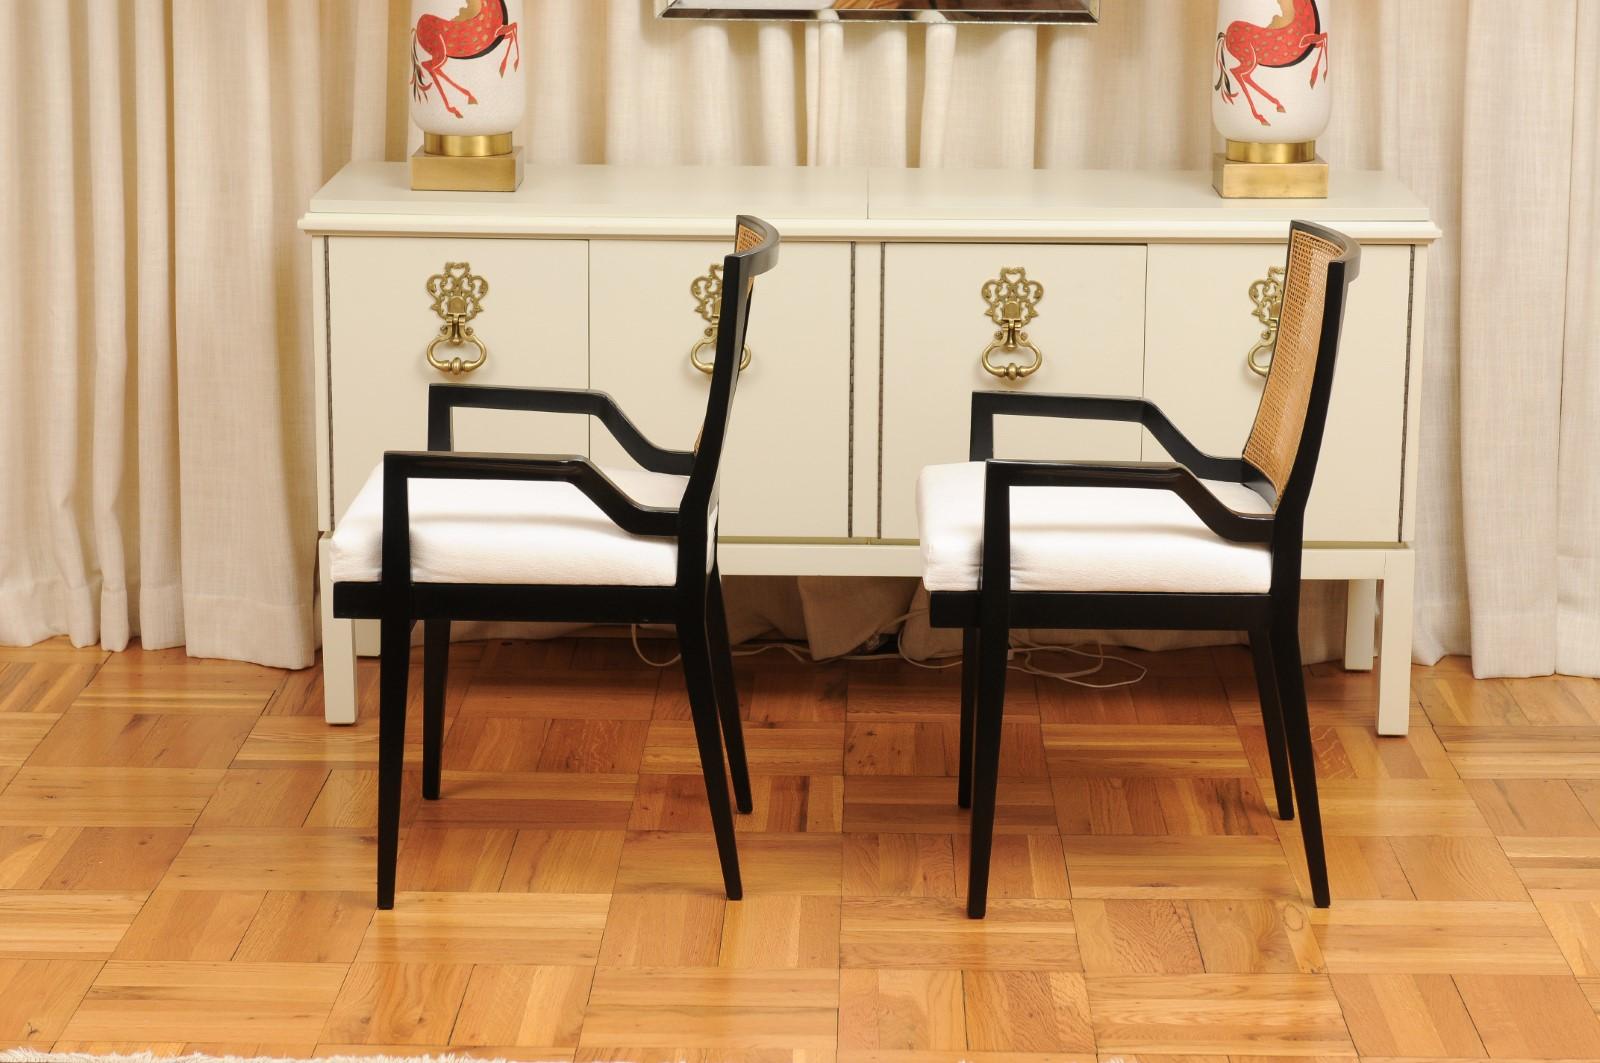 ALL ARMS Set of 8 Black Lacquer Cane Dining Chairs by Michael Taylor, circa 1960 For Sale 7